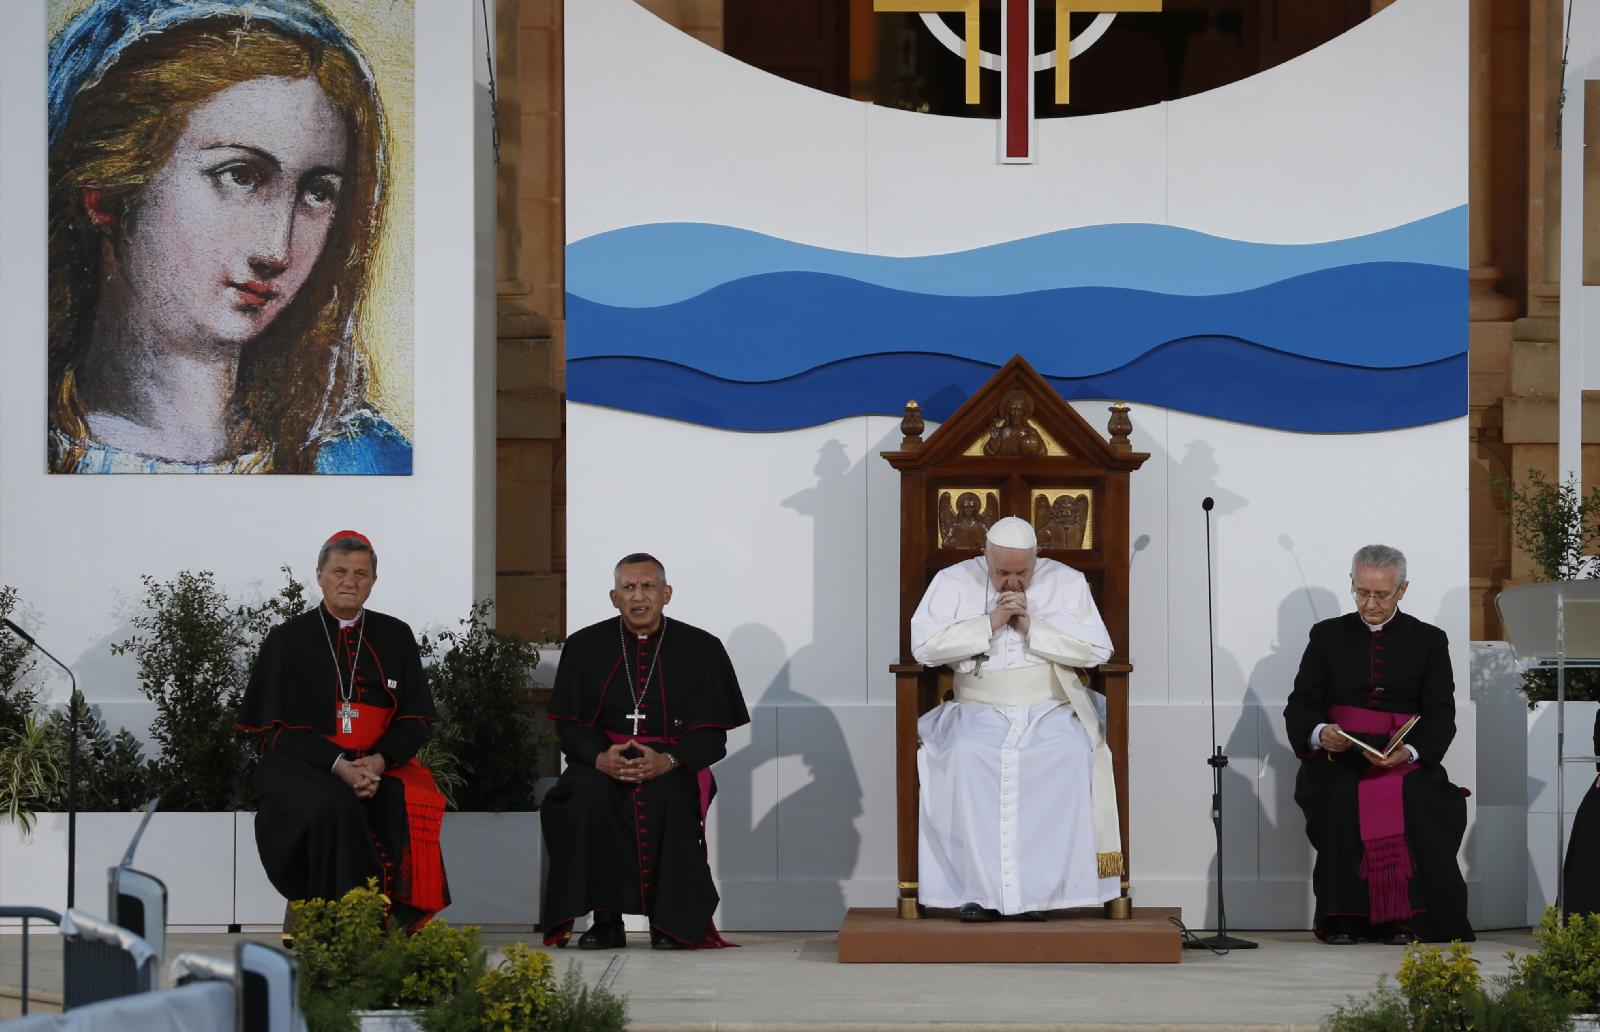 We must not 'sugarcoat' the crisis of faith, says Pope in Malta 